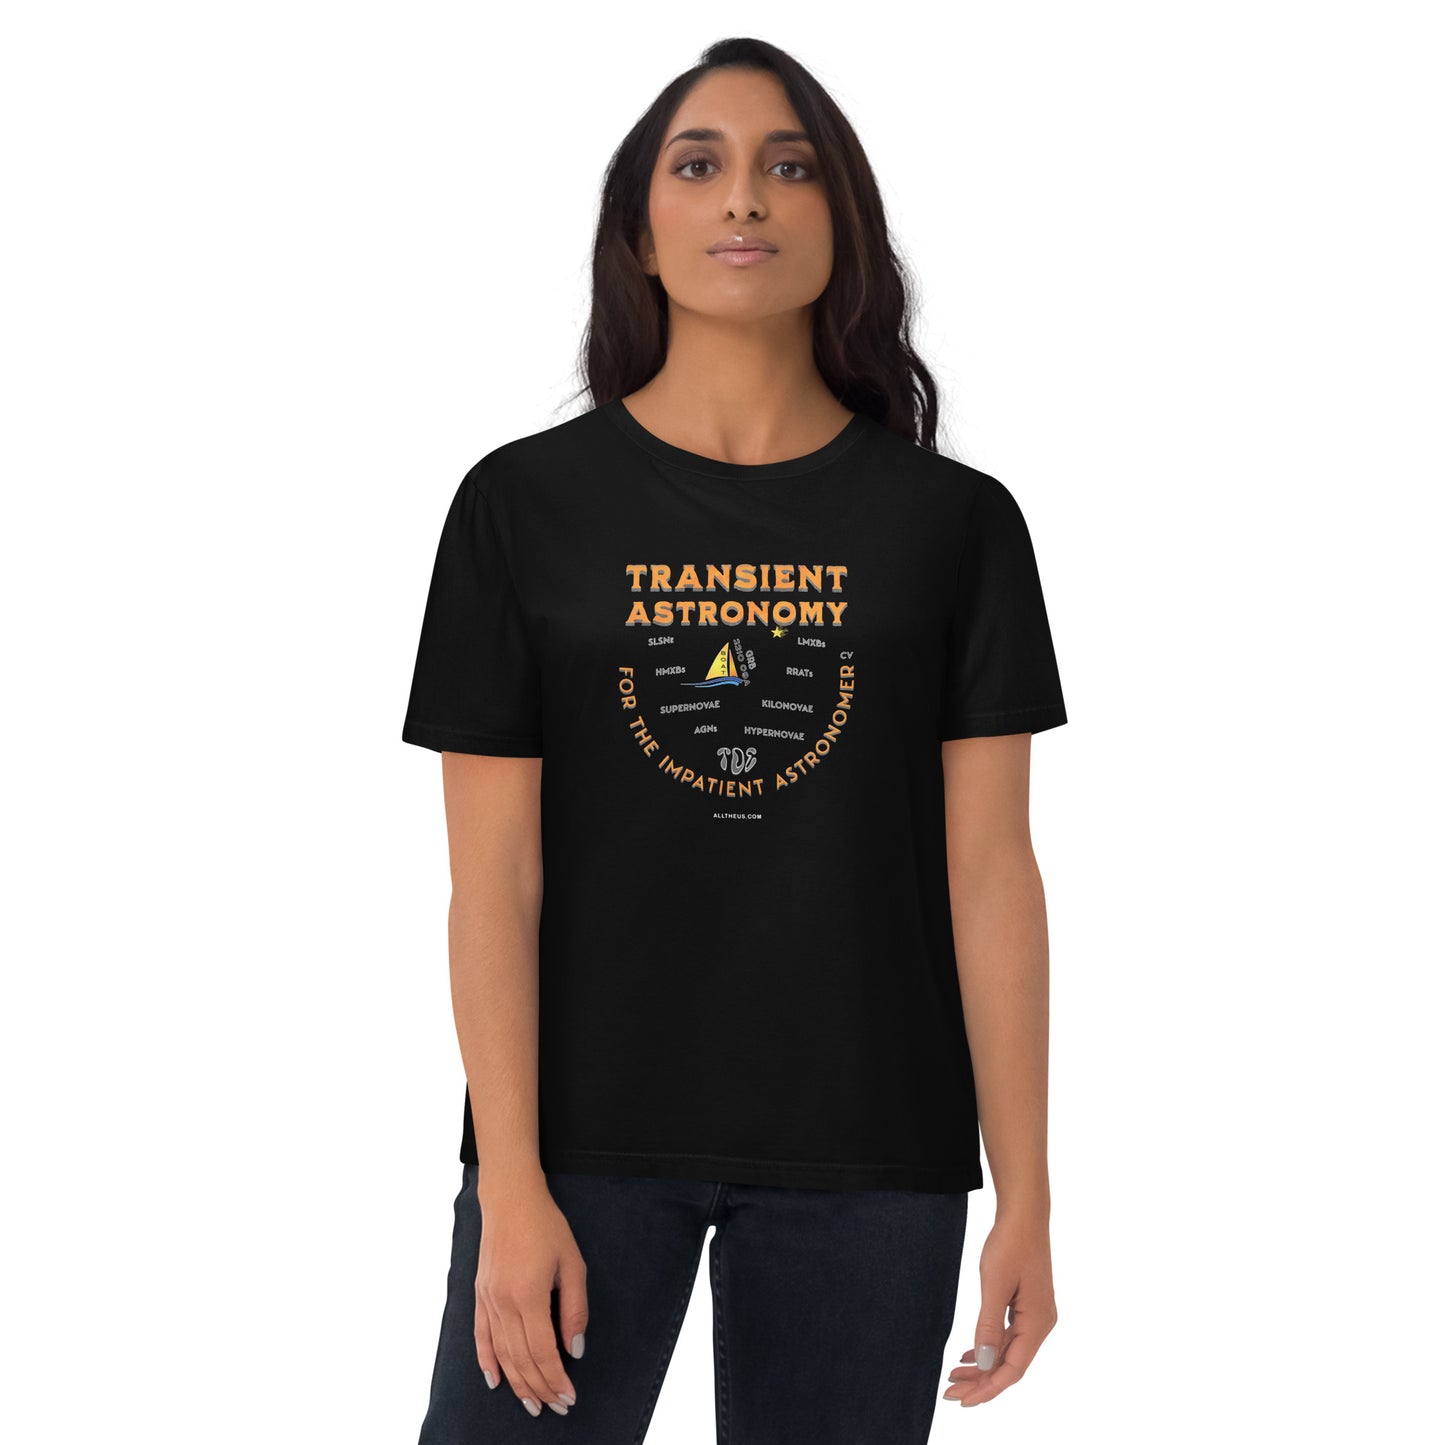 Unisex organic cotton t-shirt - Transient Astronomy, For The Impatient Astronomer